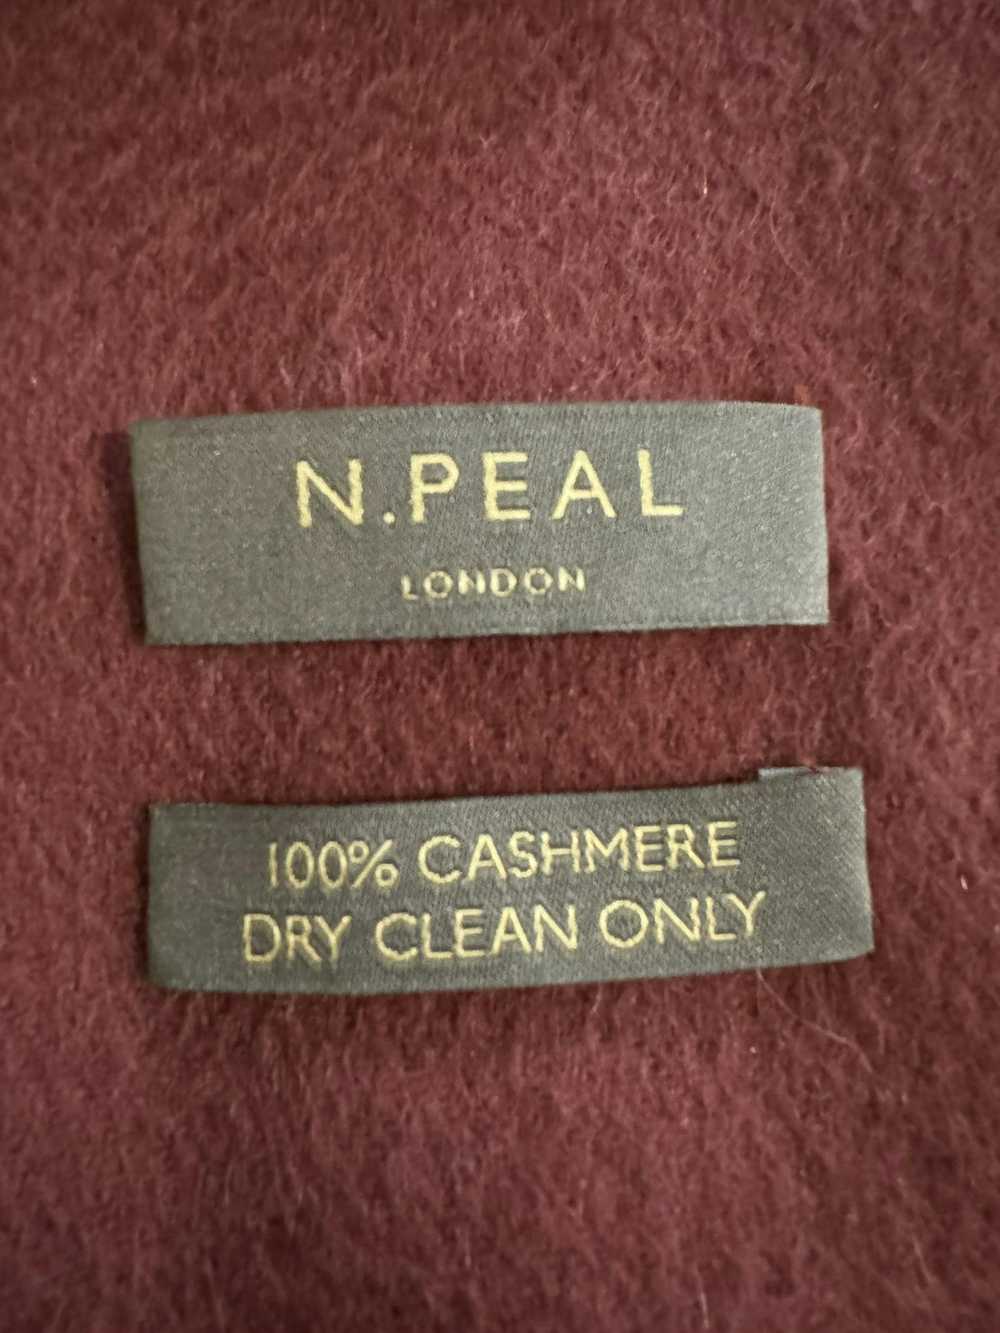 N. Peal Pure cashmere scarf - image 3